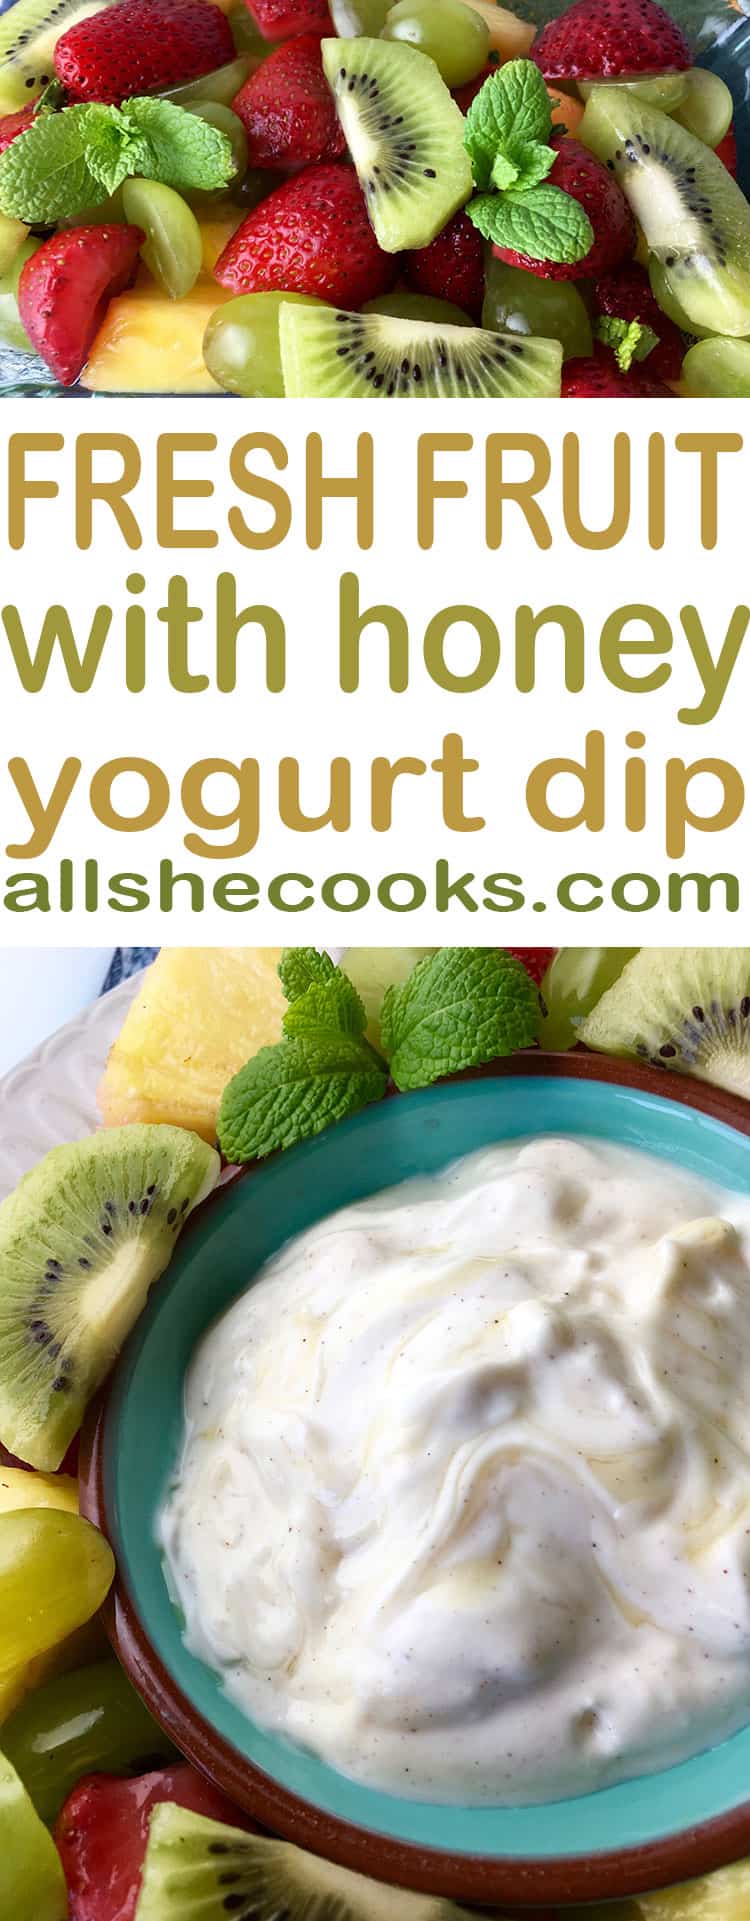 Enjoy this easy fresh fruit salad with honey yogurt dip. Perfect for a snack or party food.